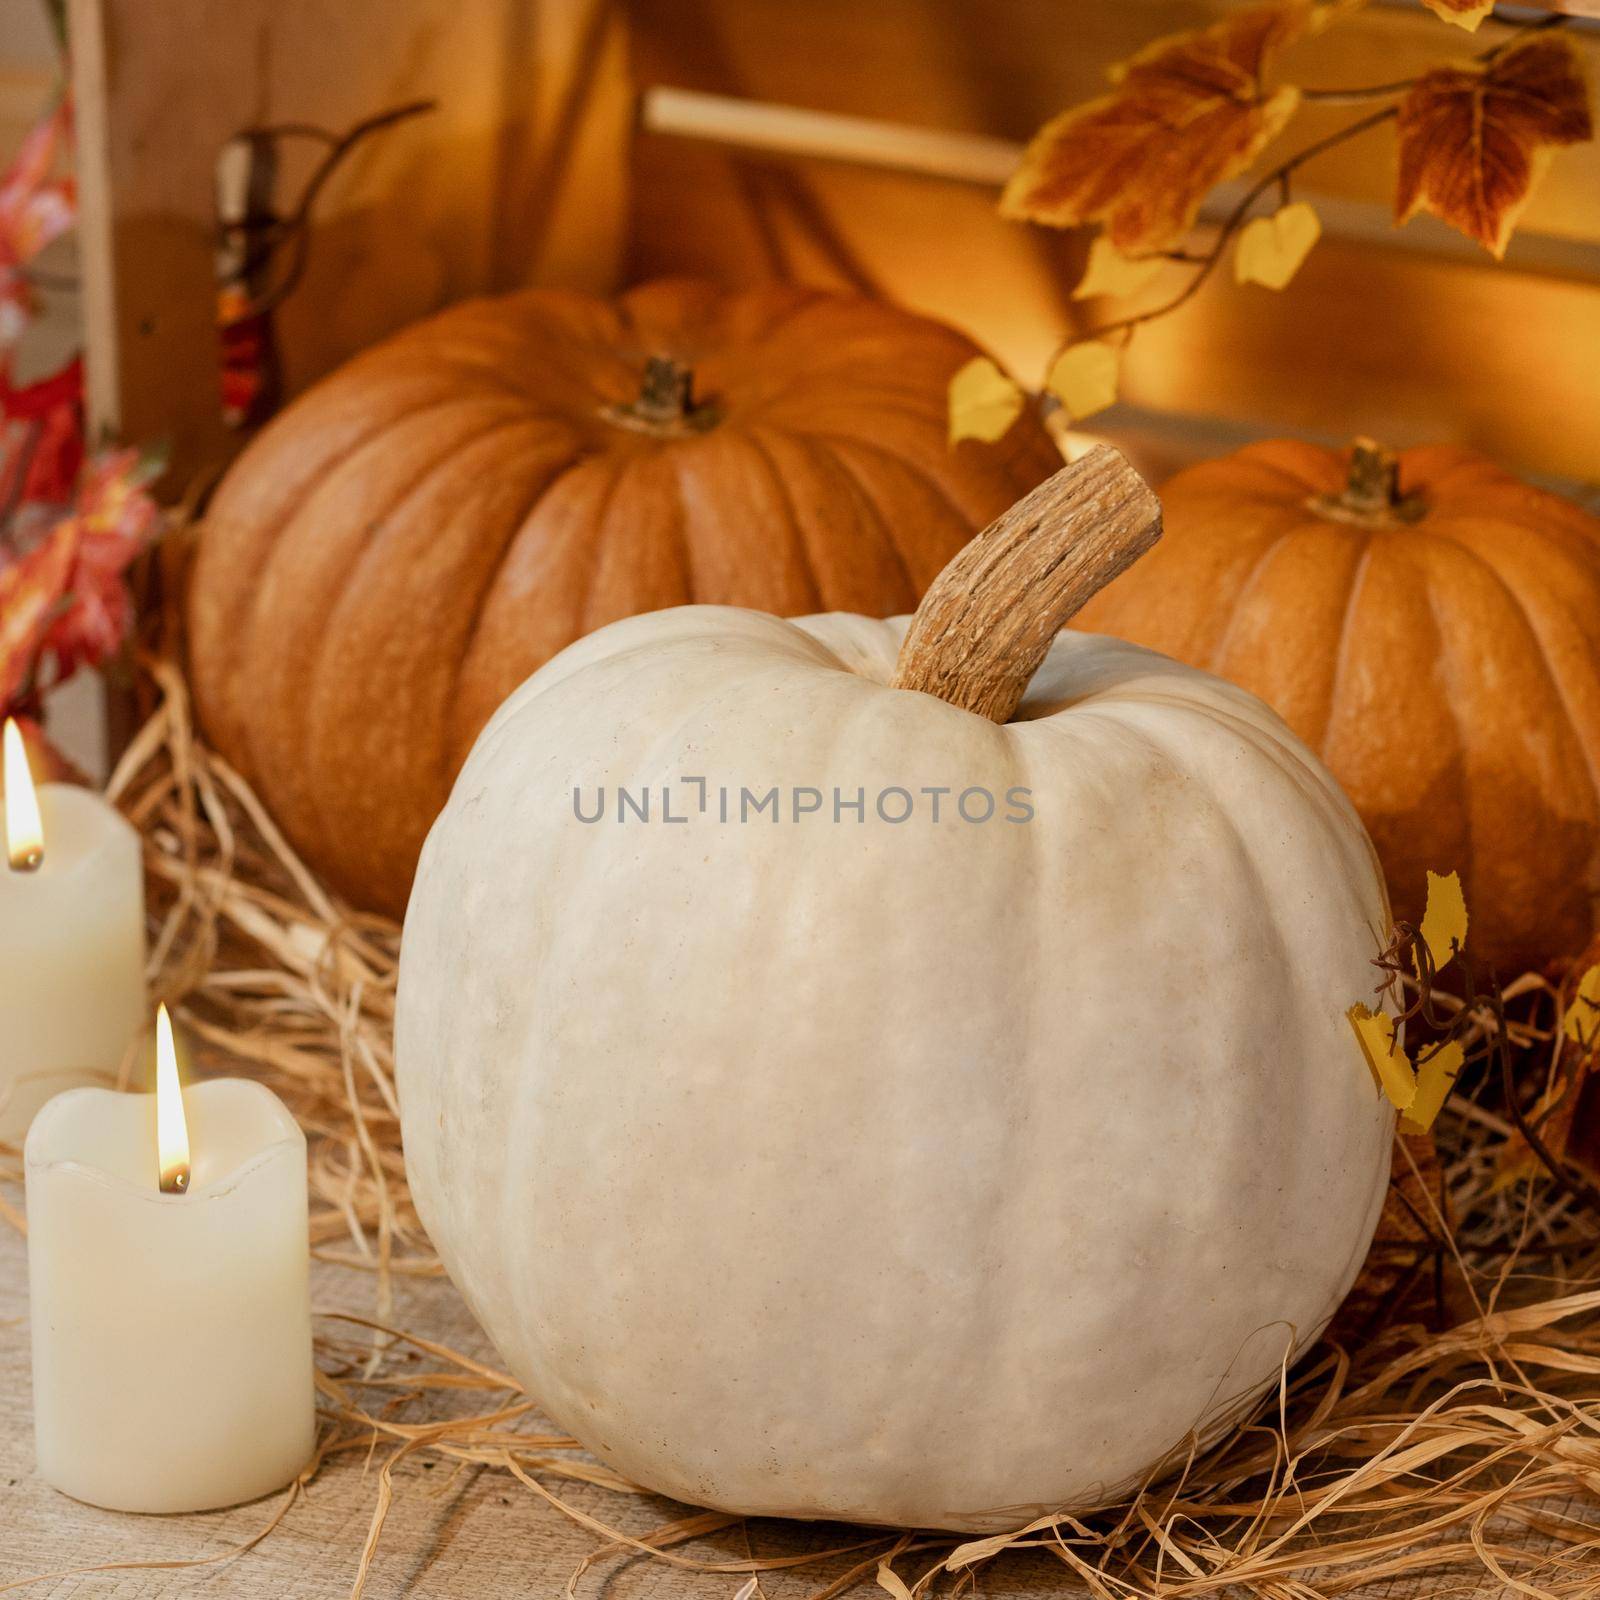 White Halloween Pumpkins in the wooden crates with candles, straw, autumn leaves